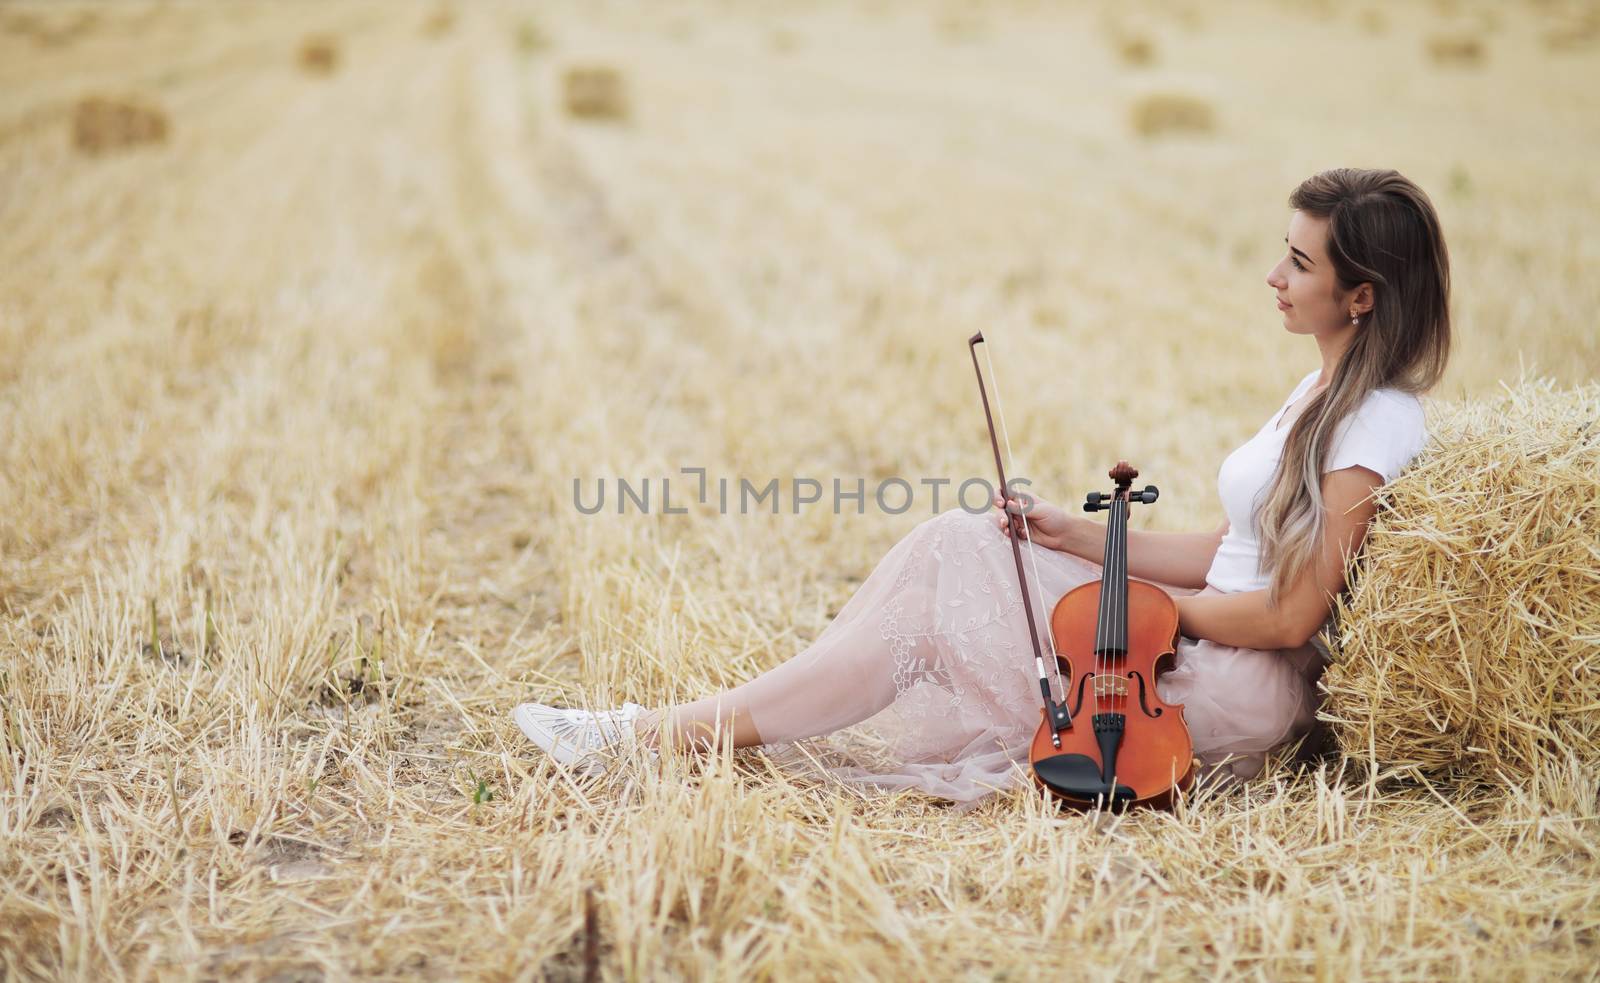 Romantic young woman with flowing hair, holding a violin in her hand in a field after harvest. Square sheaves of hay in the field. Violin training